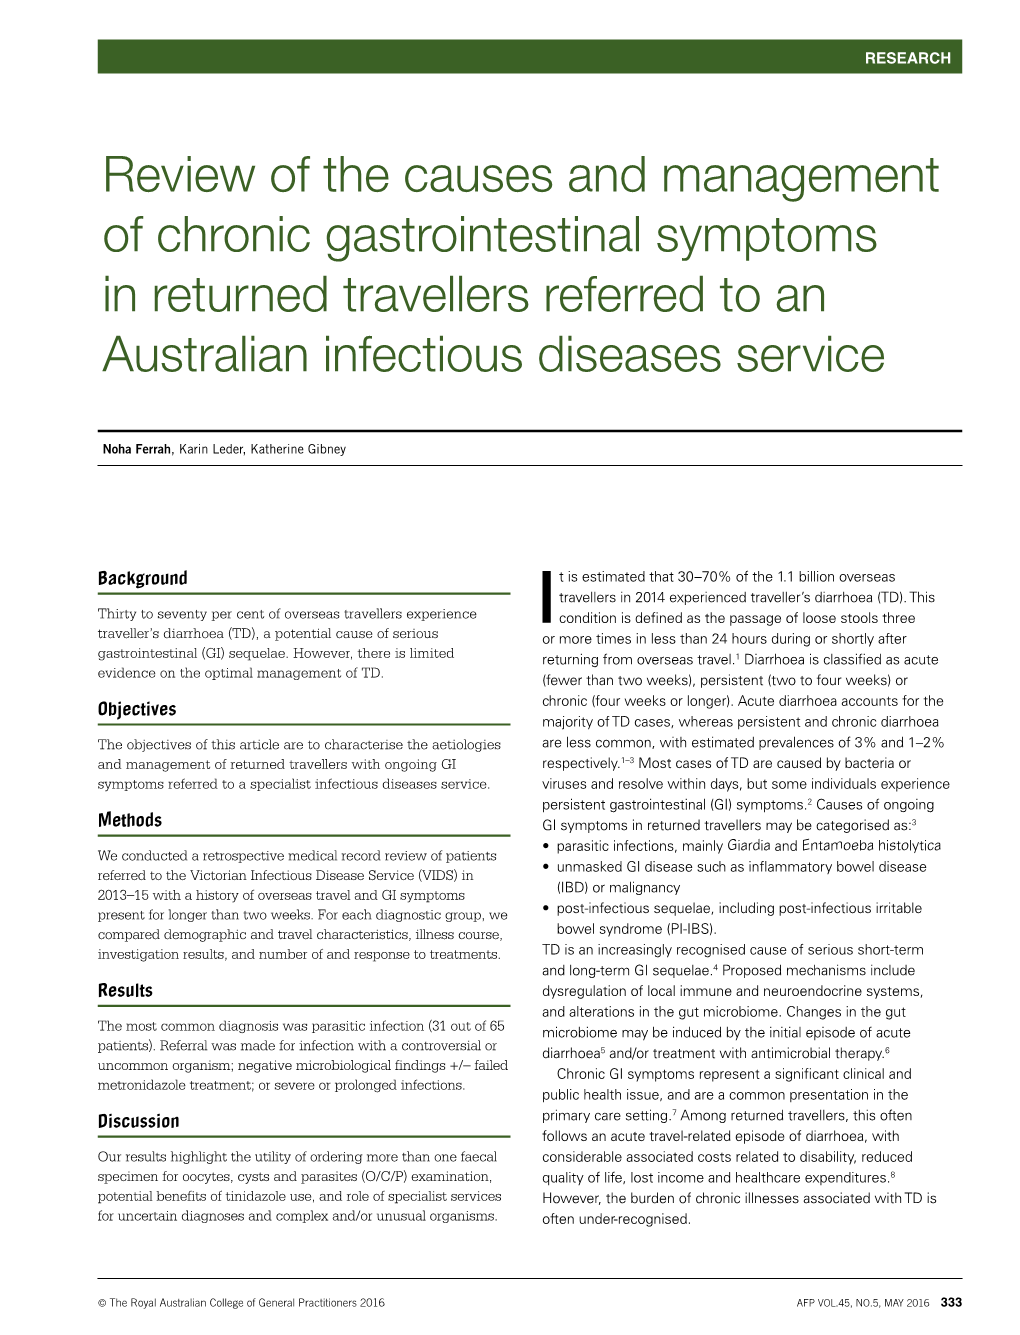 Review of the Causes and Management of Chronic Gastrointestinal Symptoms in Returned Travellers Referred to an Australian Infectious Diseases Service